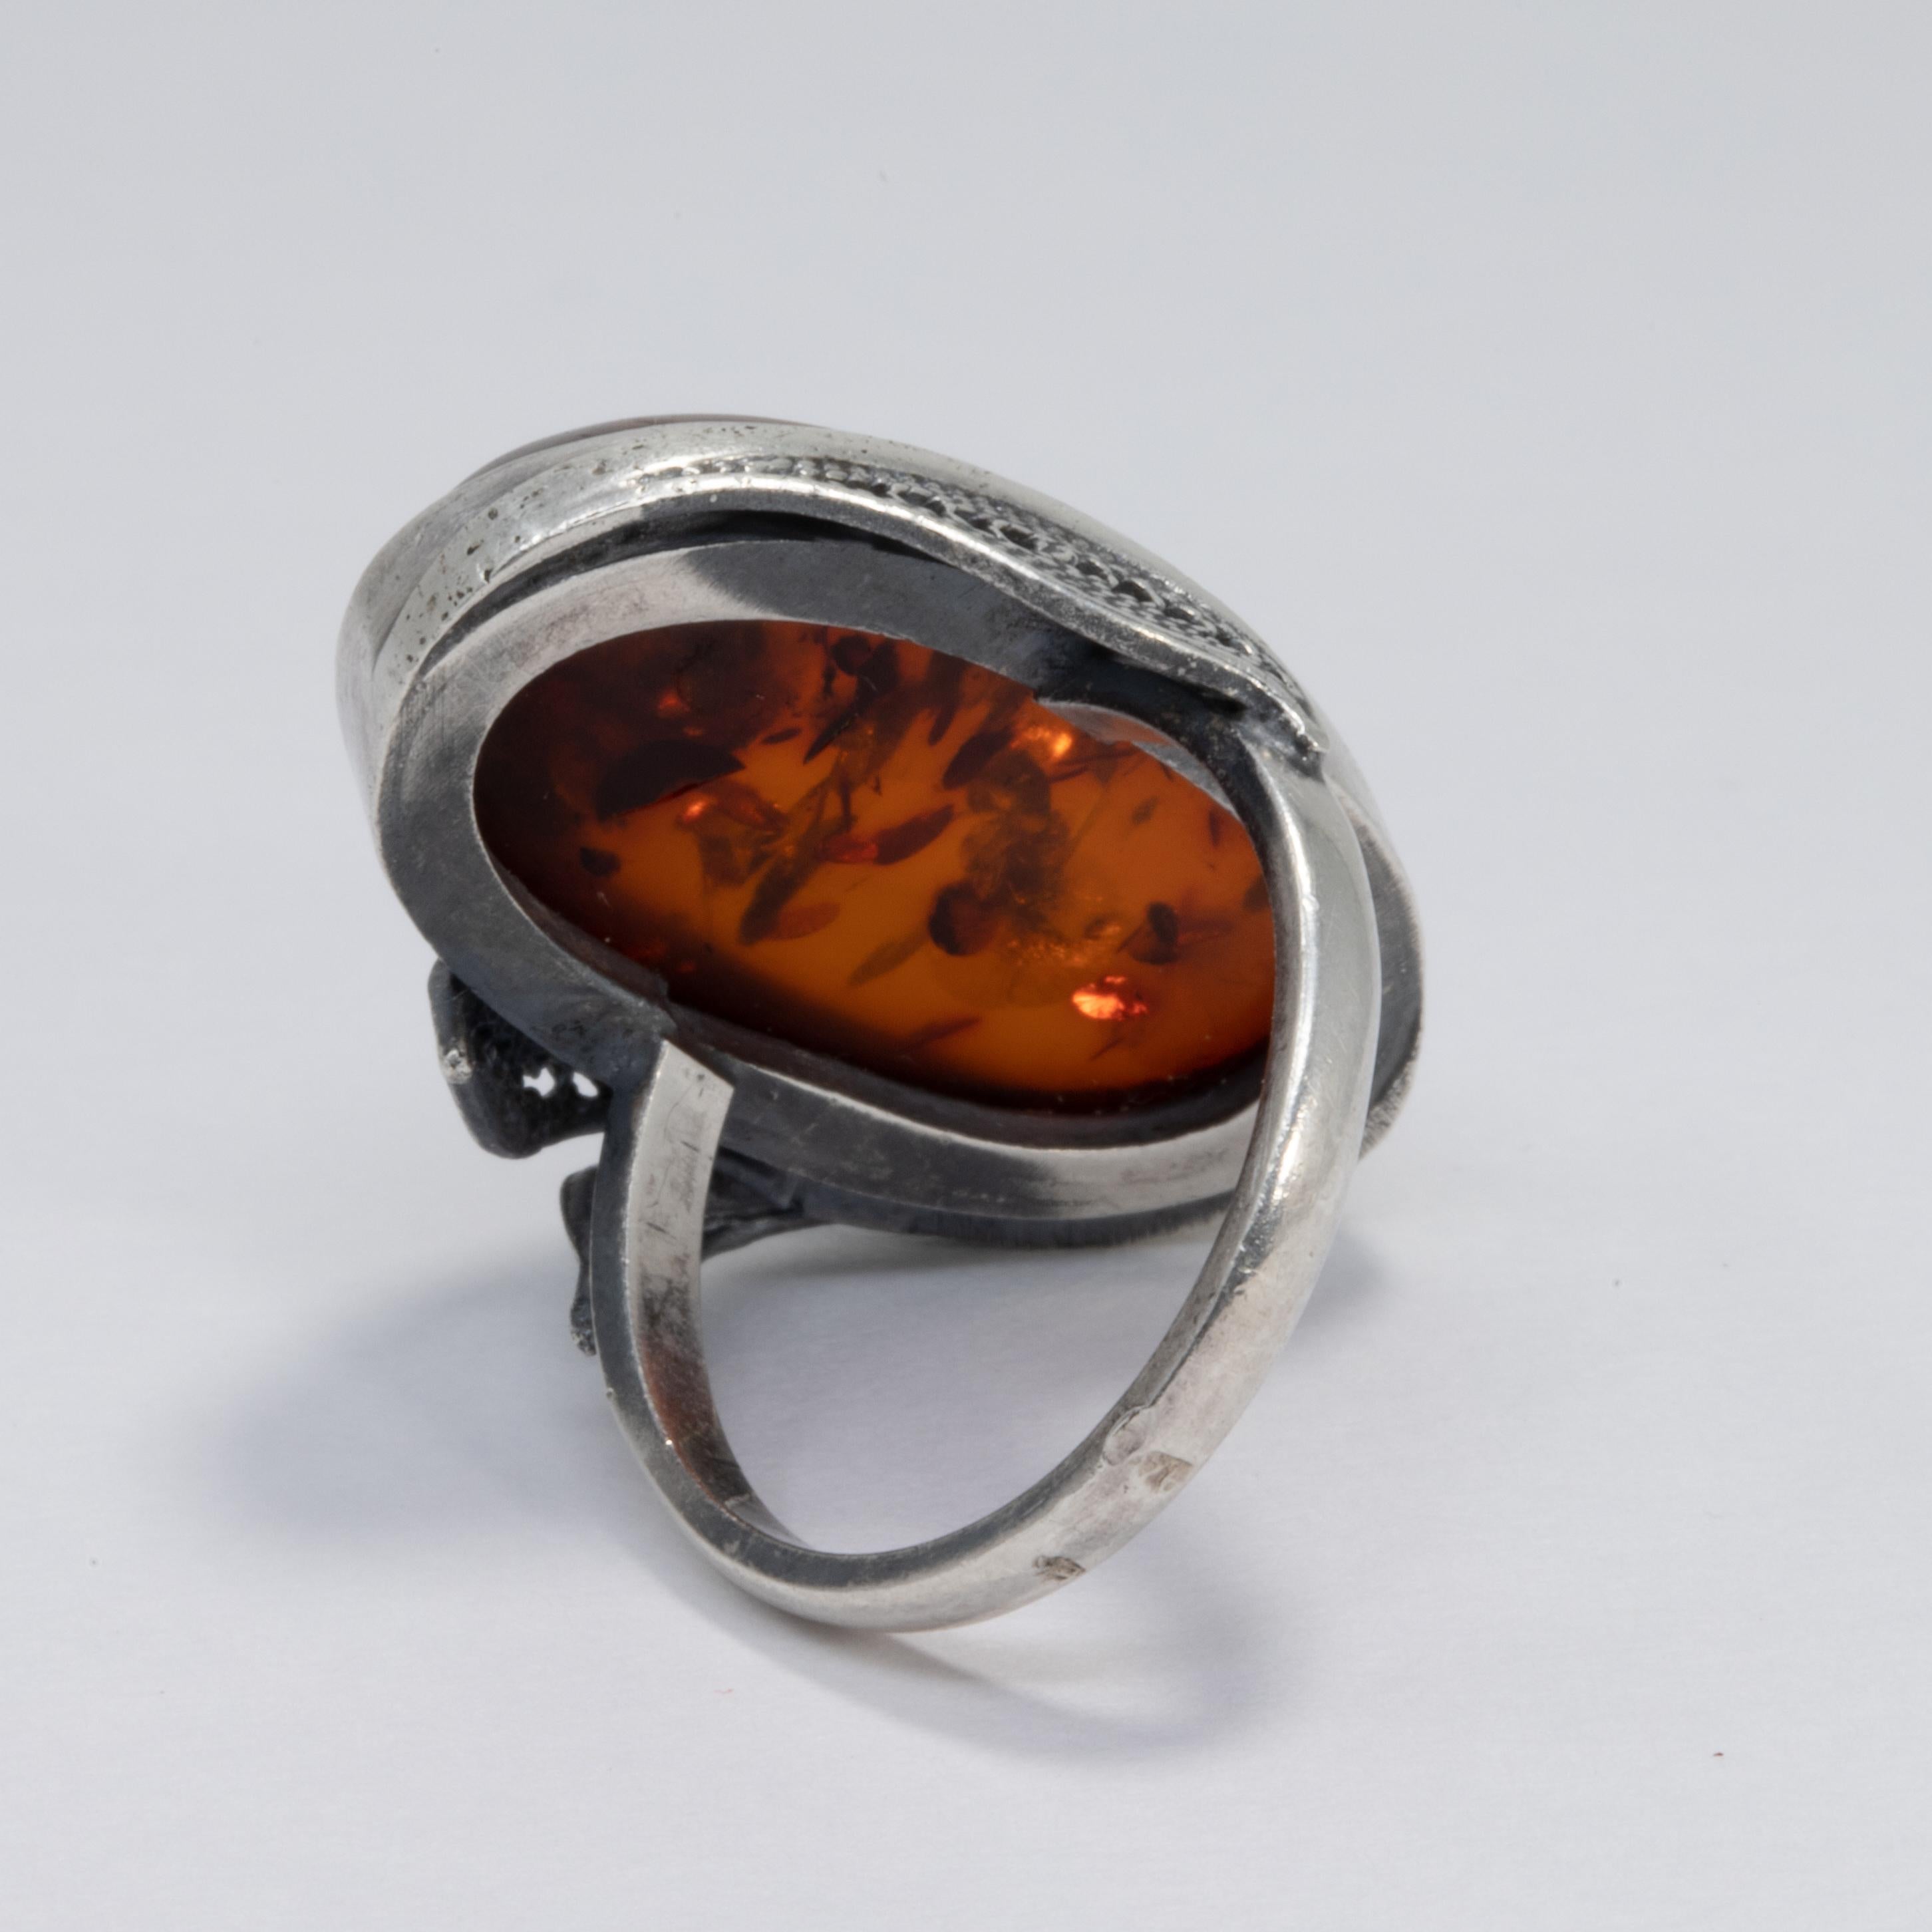 Vintage ring with Baltic Amber